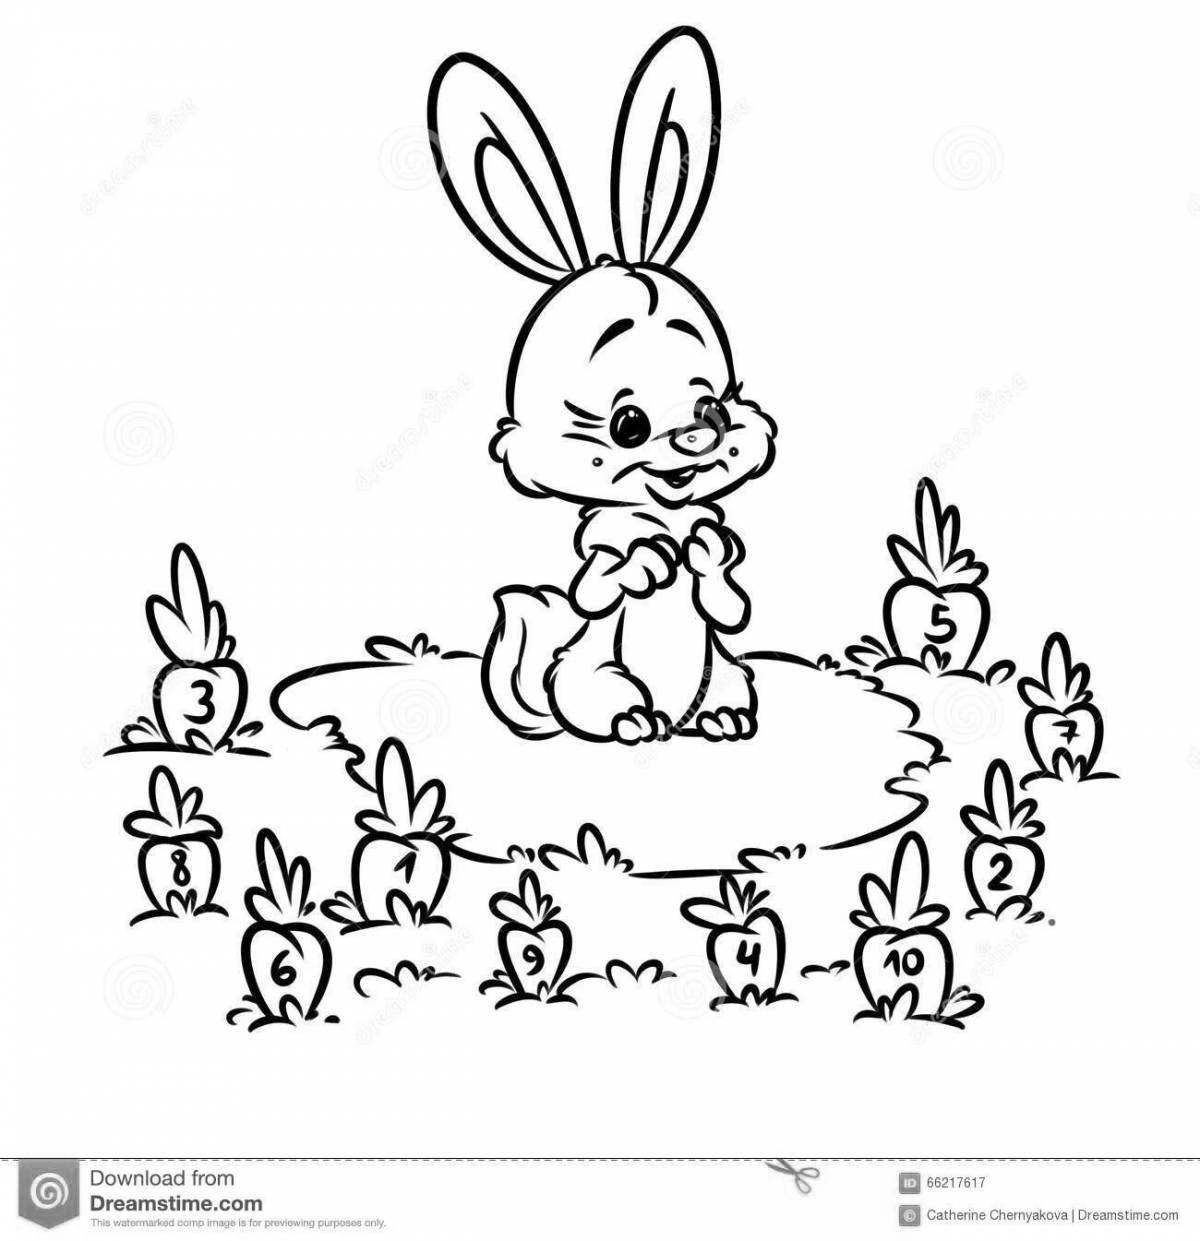 Fancy hunters and rabbits coloring page